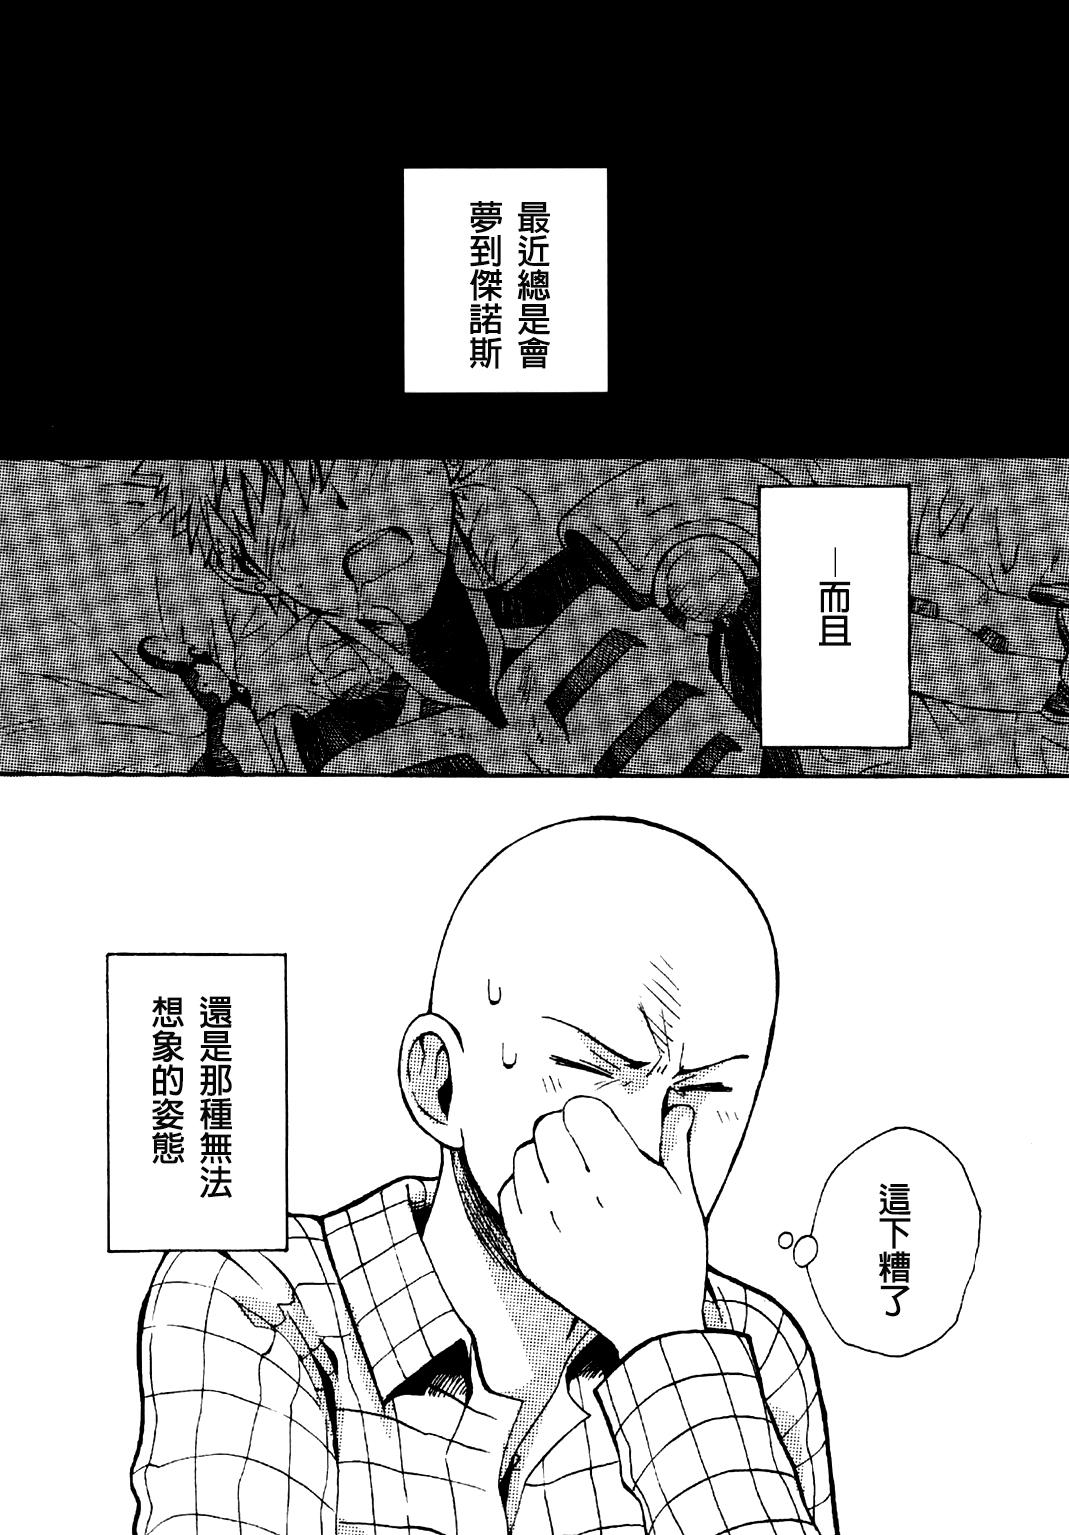 Amature Porn NATURAL JUNKIE - One punch man Gay Cumshots - Page 3